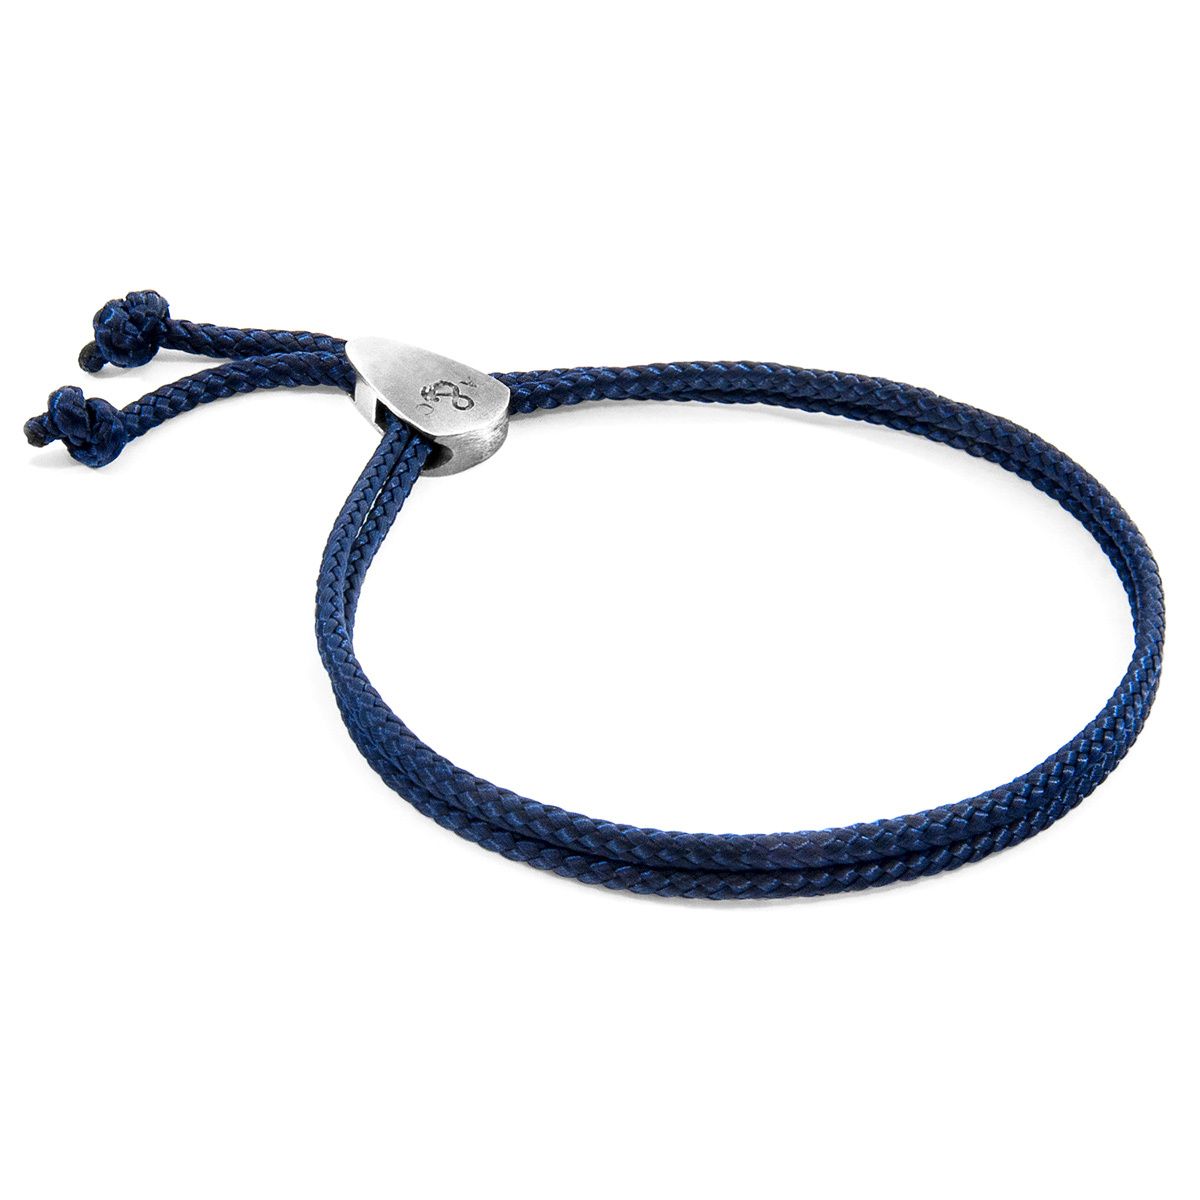 The Navy Blue Pembroke Silver and Rope Bracelet was both designed and skilfully handcrafted completely in Great Britain, In Quality We Trust. For the Modern Journeyman (and woman), ANCHOR & CREW takes ownership of an exploratory lifestyle and enjoys the Happy-Good Life. Combining British craft manufacturing with a discerning modern-minimalist style, this ANCHOR & CREW bracelet features: 

3mm diameter performance Marine Grade polyester and nylon rope (GB)
Solid .925 sterling silver divider pulley (GB) 

SIZING
This bracelet is one size fits all, with the rope able to extend or tighten to suit your wrist size. To take the bracelet on or off your wrist, simply push or pull the dividing slider along the rope to make the wrist-gap smaller or larger.